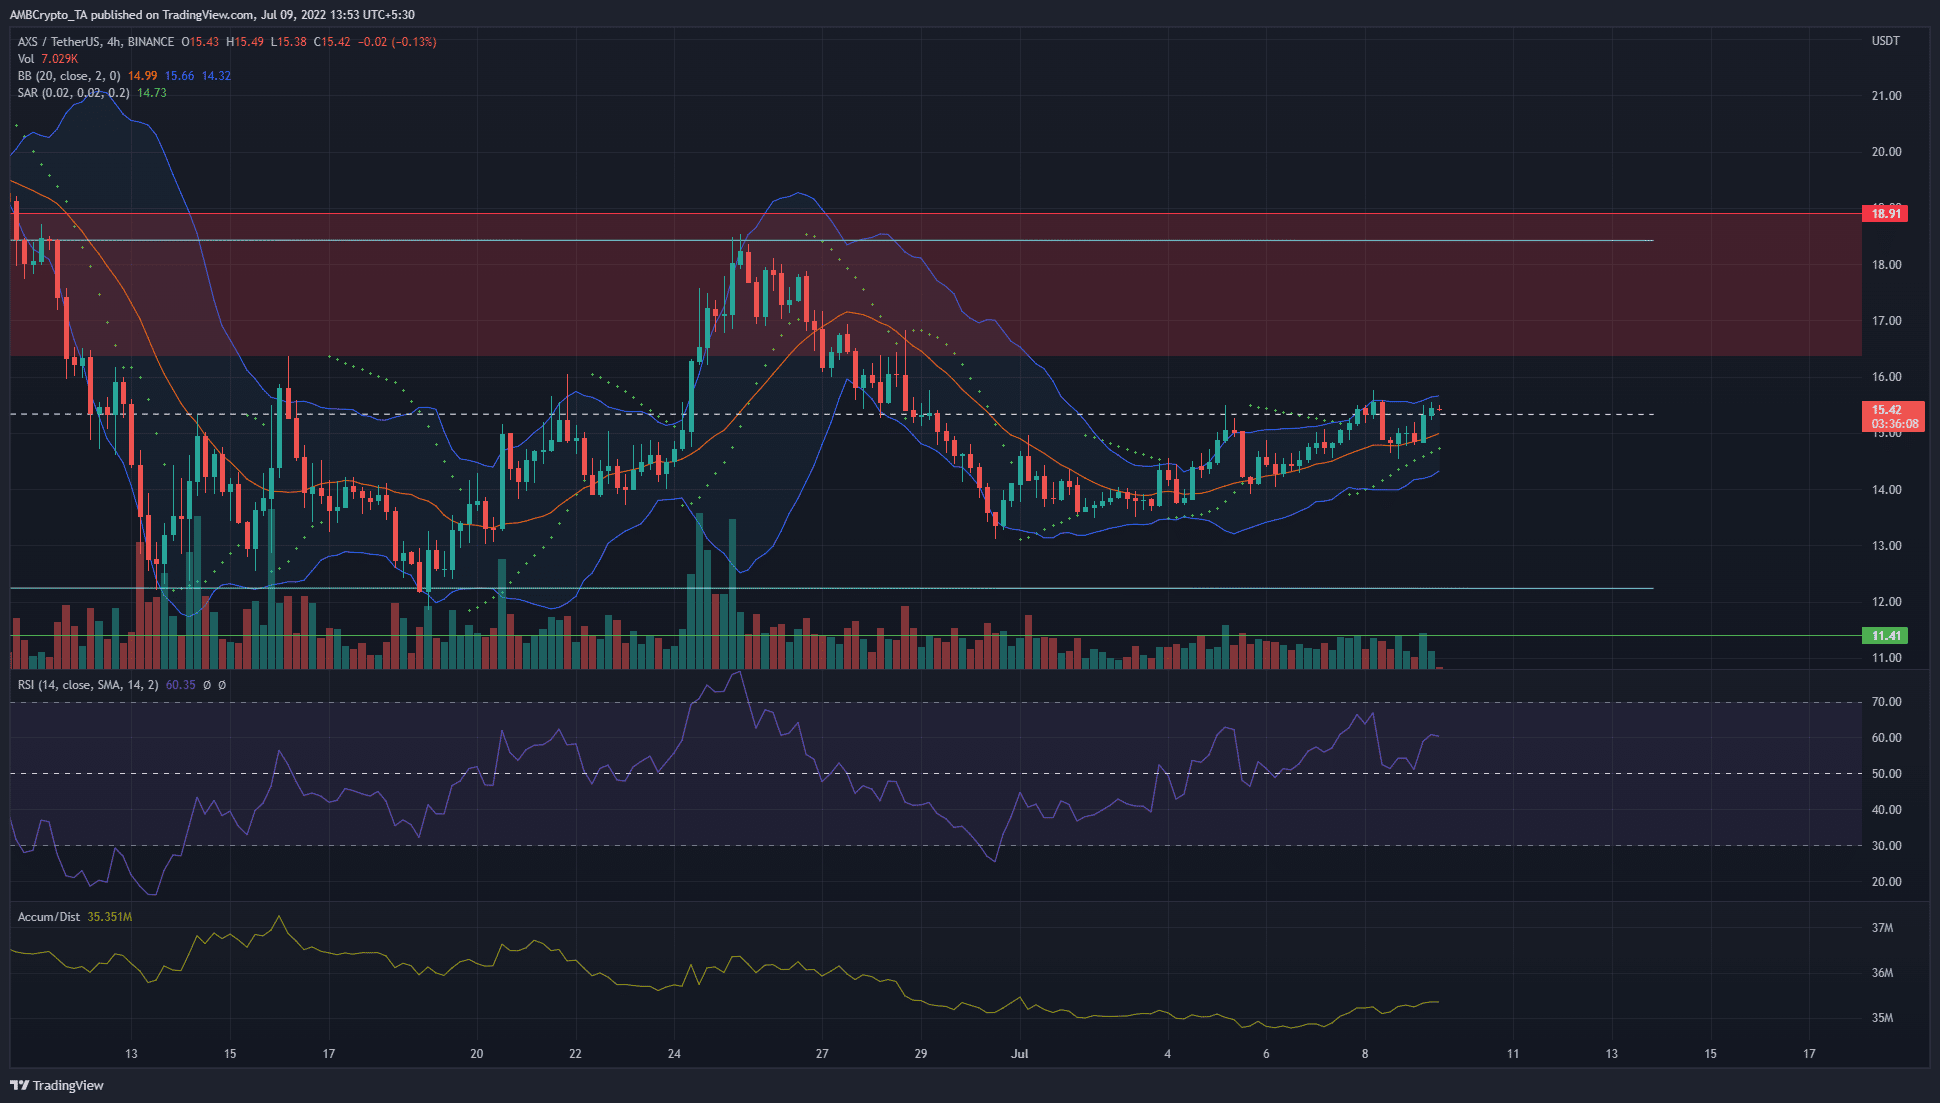 Axie Infinity [AXS] advances on the price chart but the bears could be waiting to spring a trap